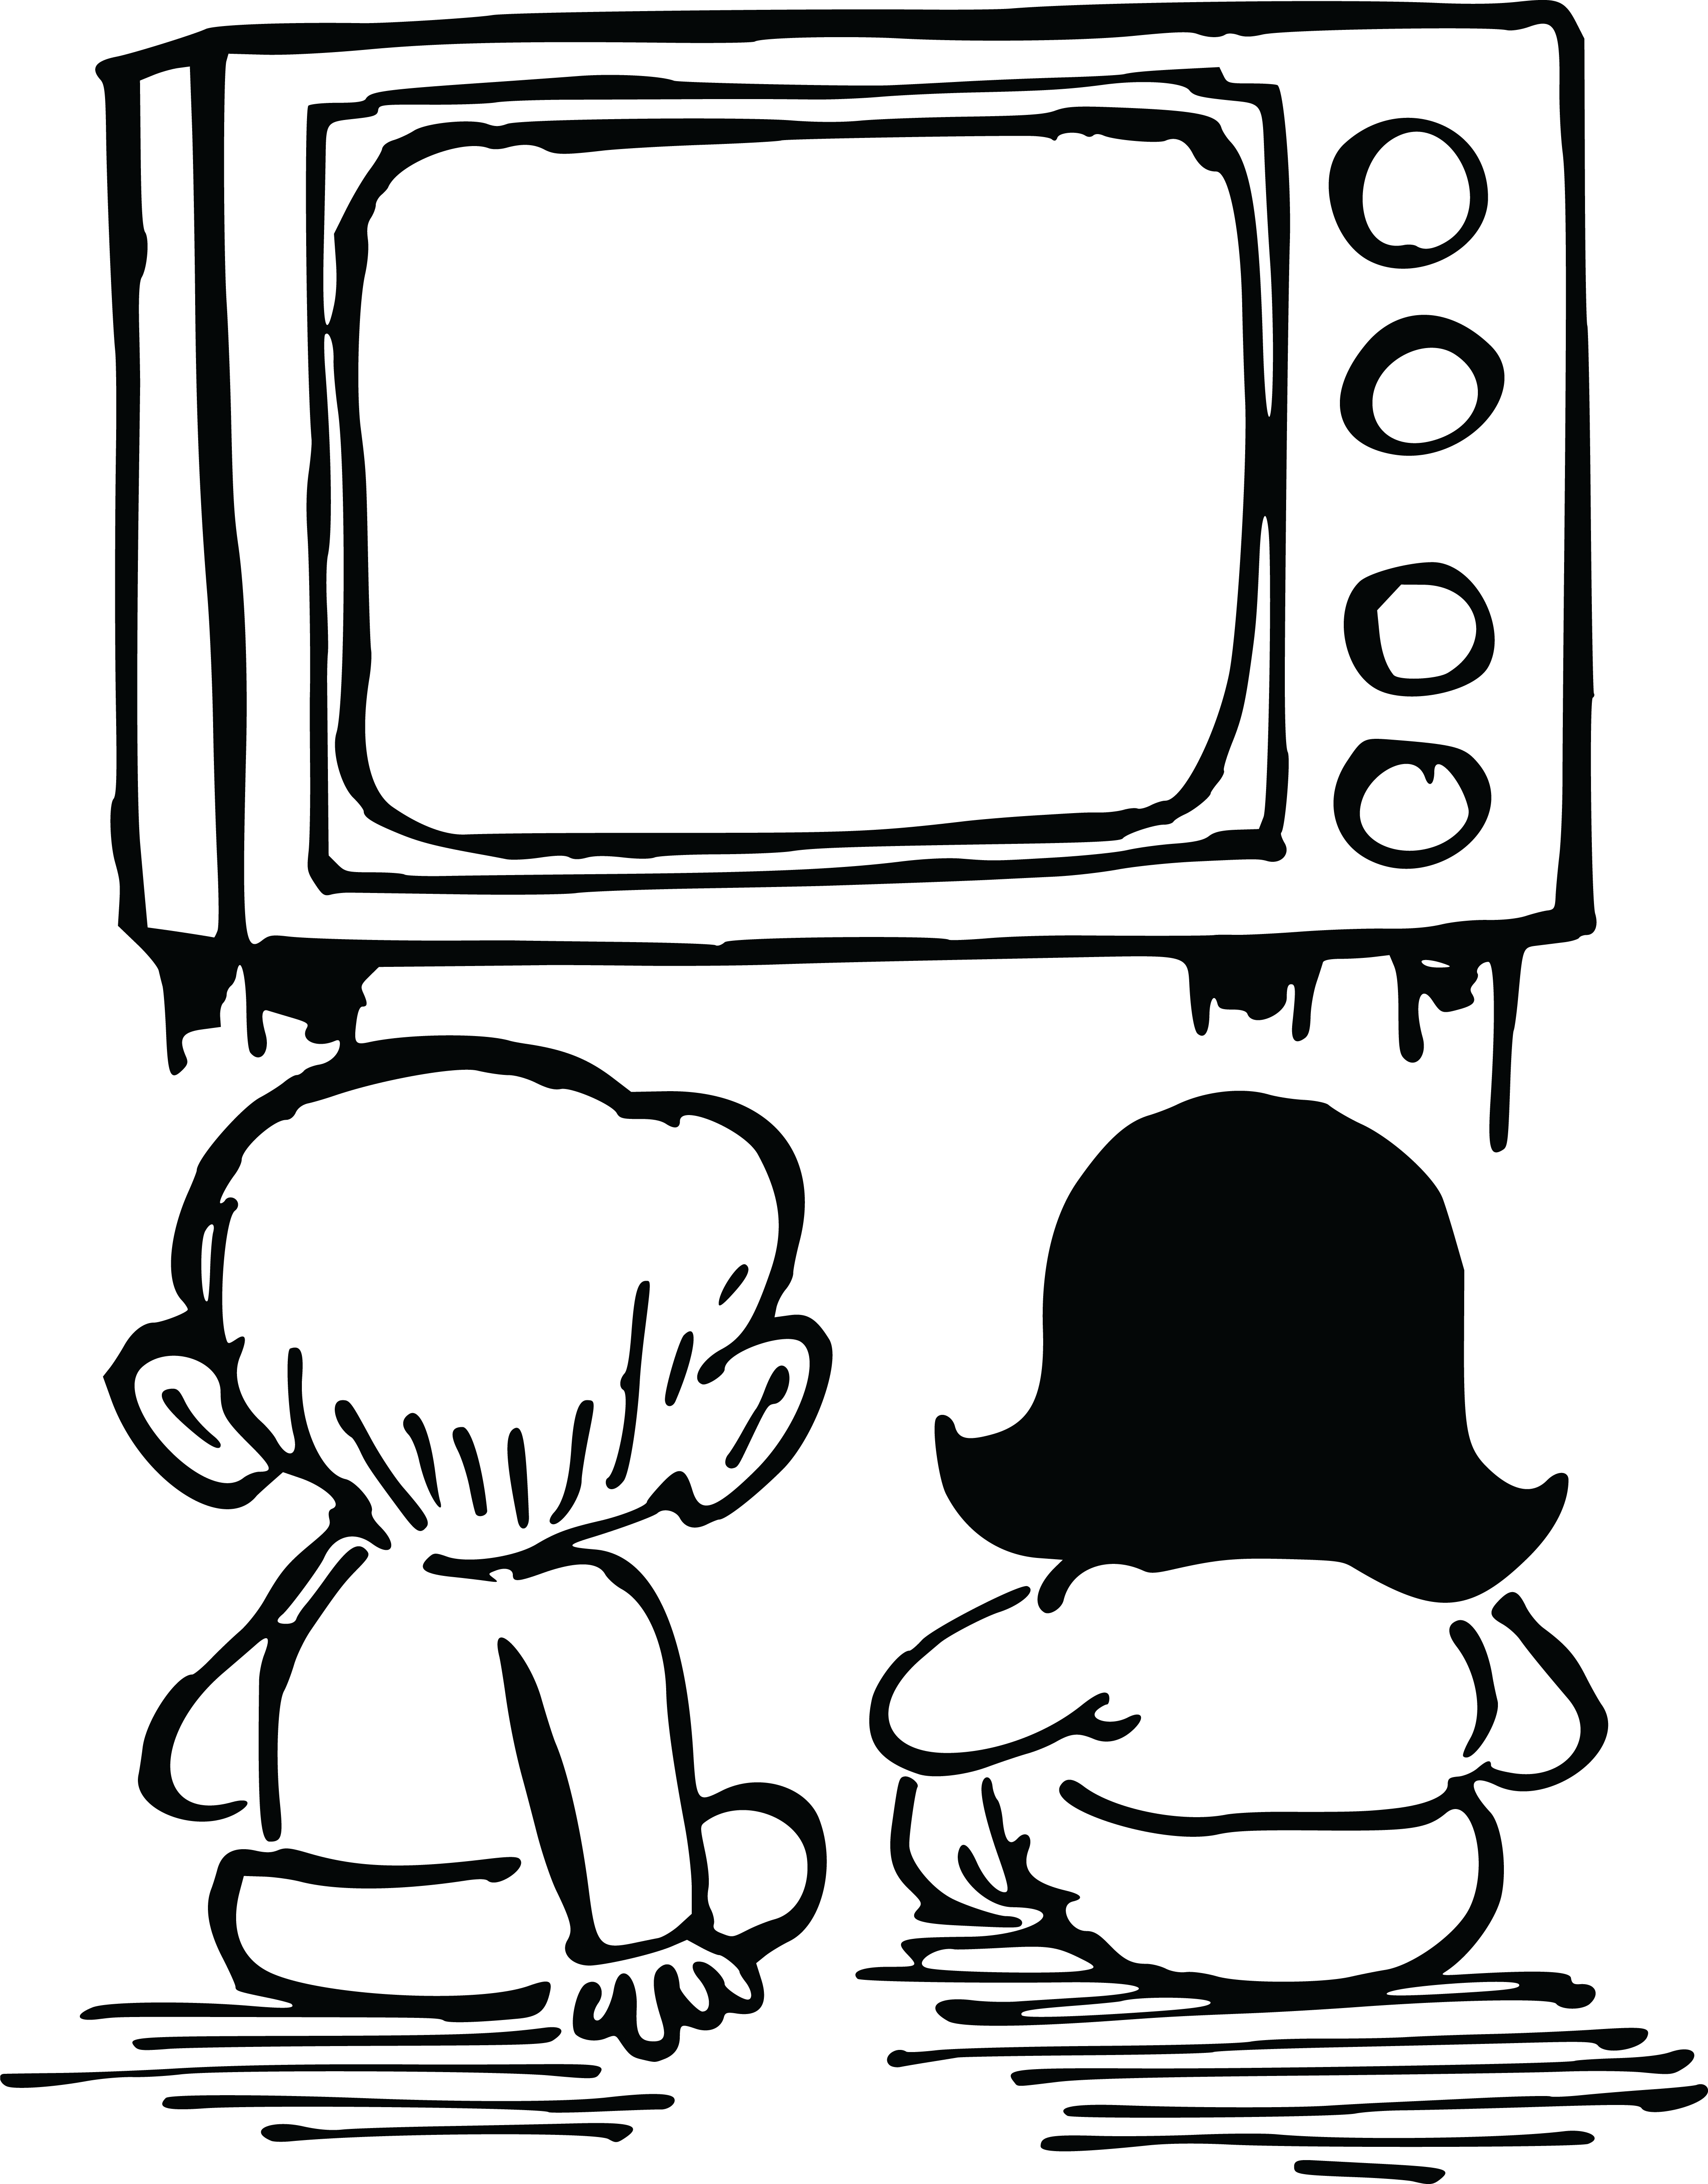 Free Clipart Of Kids Watching Tv